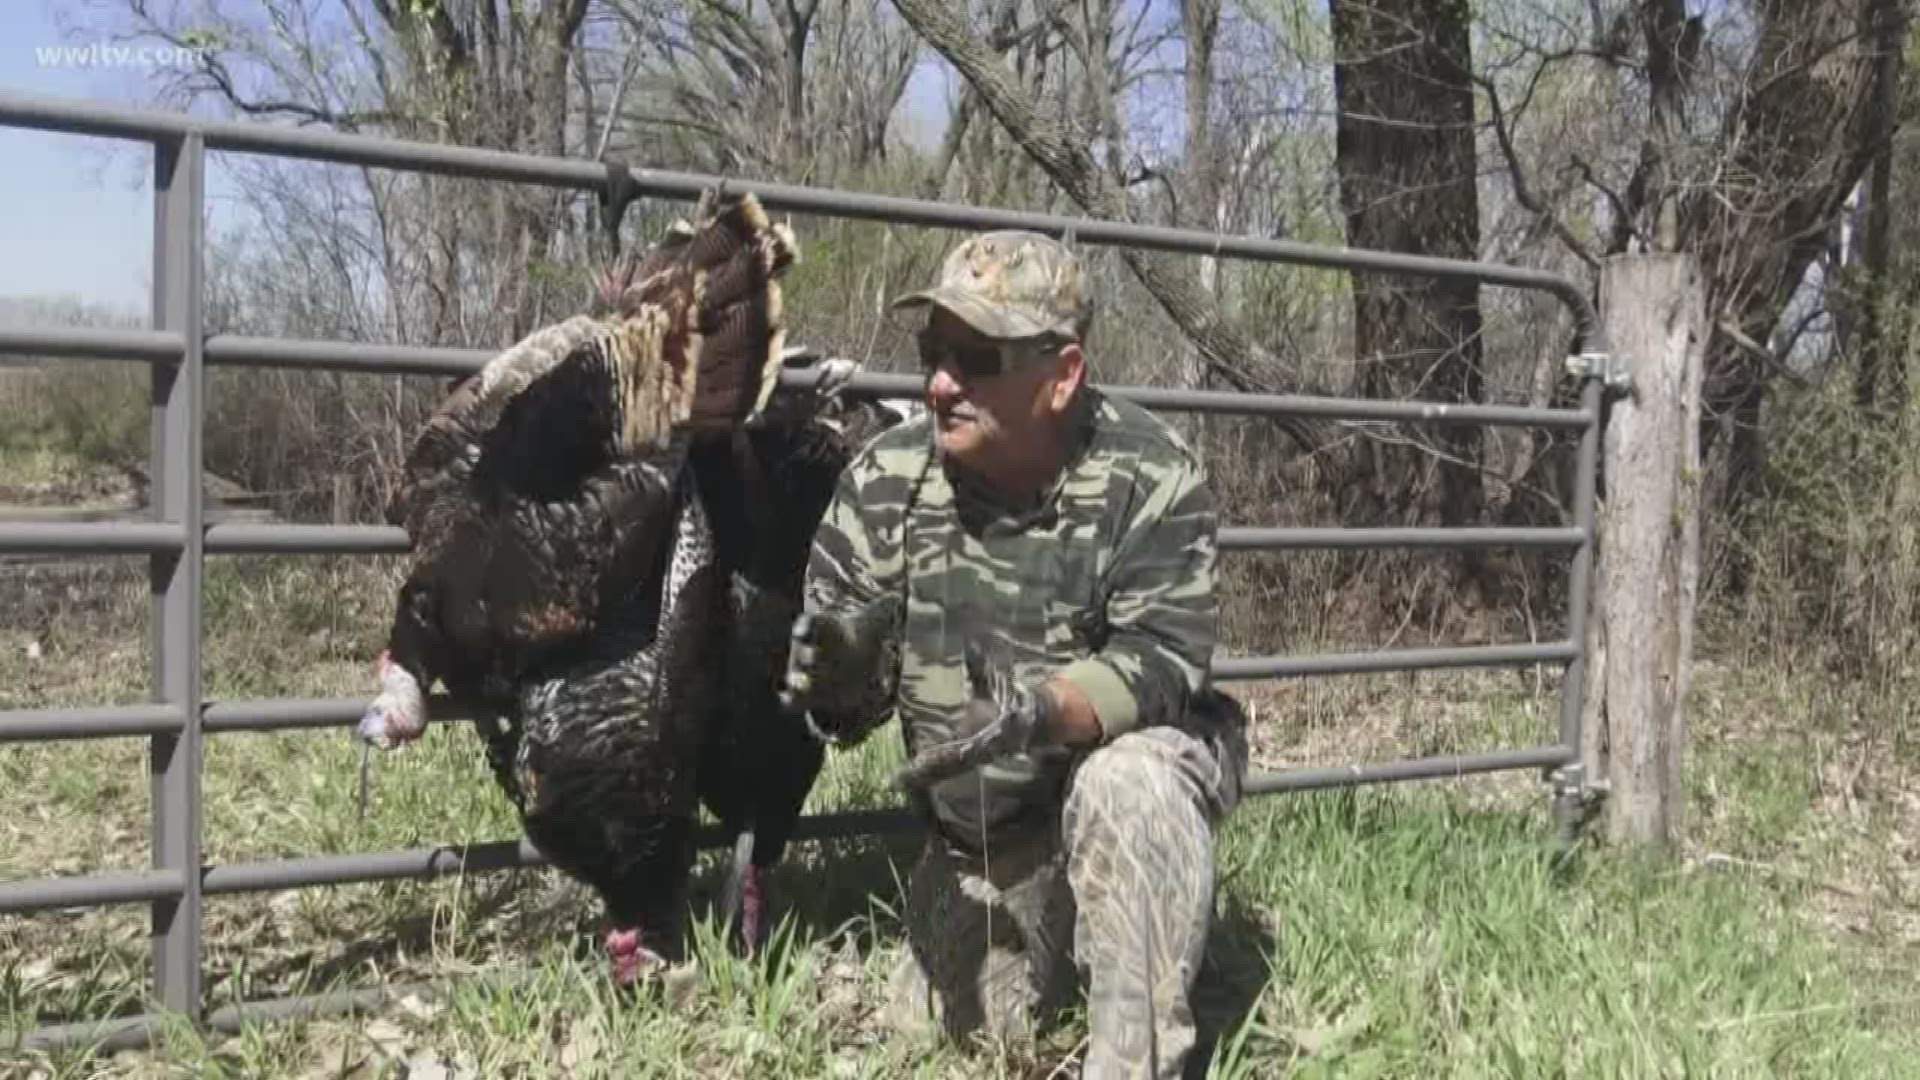 A lot of people ask me, "Don why do you go all the way to Kansas to hunt turkey when we've got good turkey hunting in the Gulf Coast states?"